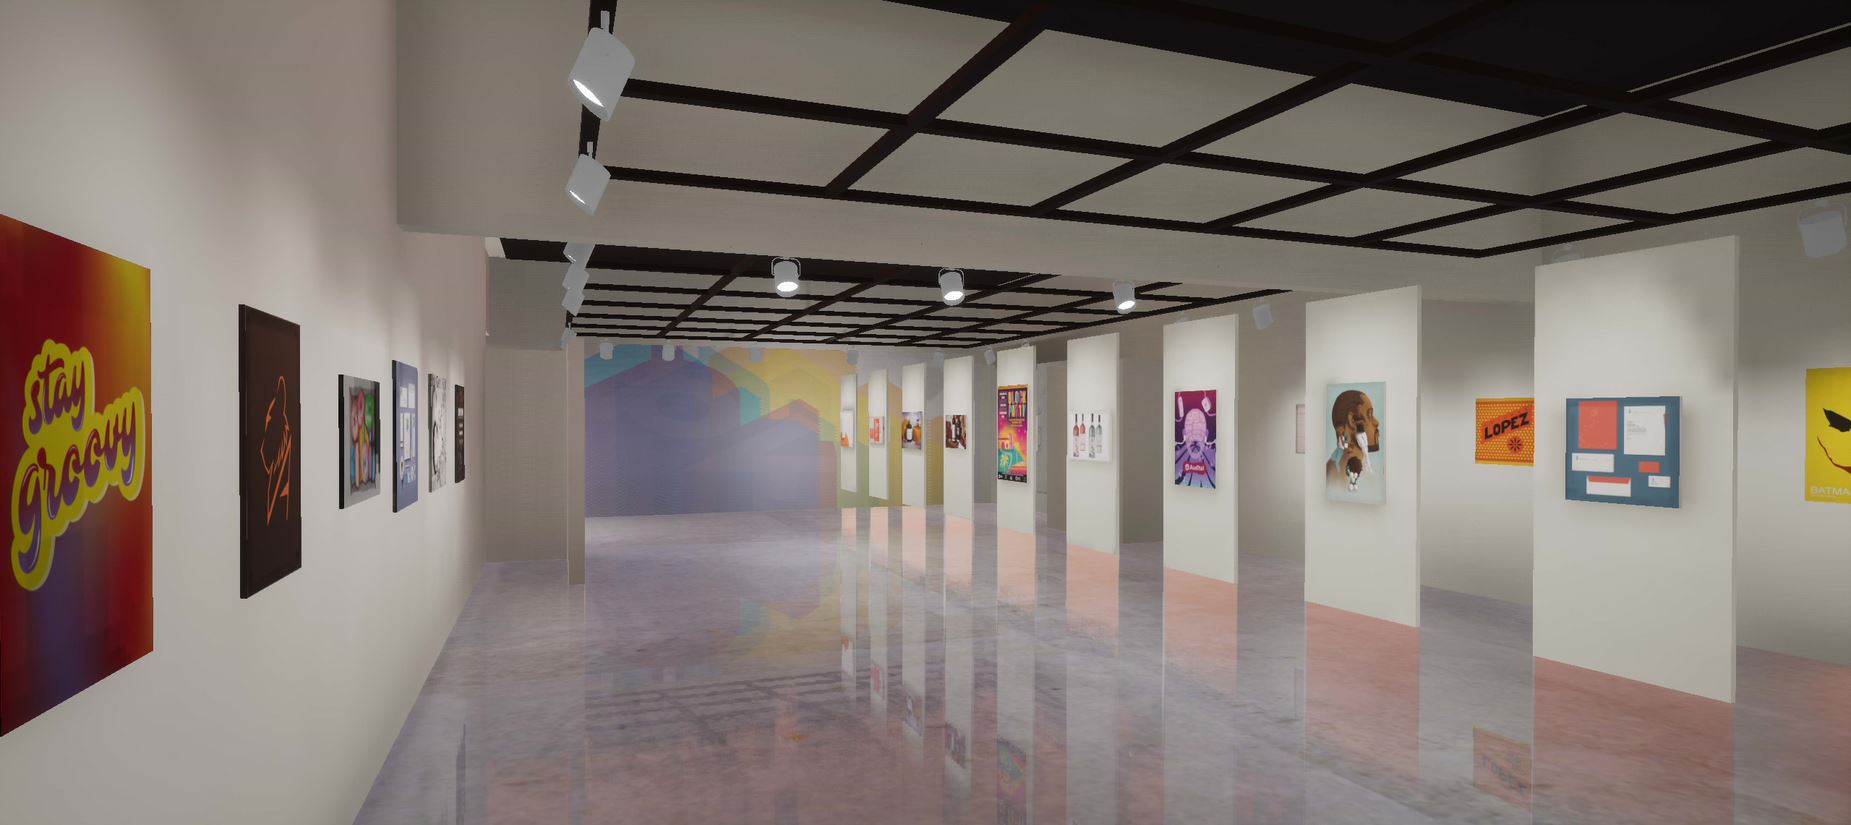 screen capture of inside of virtual gallery. Various modern artworks made using ink and clay are displayed throughout the gallery